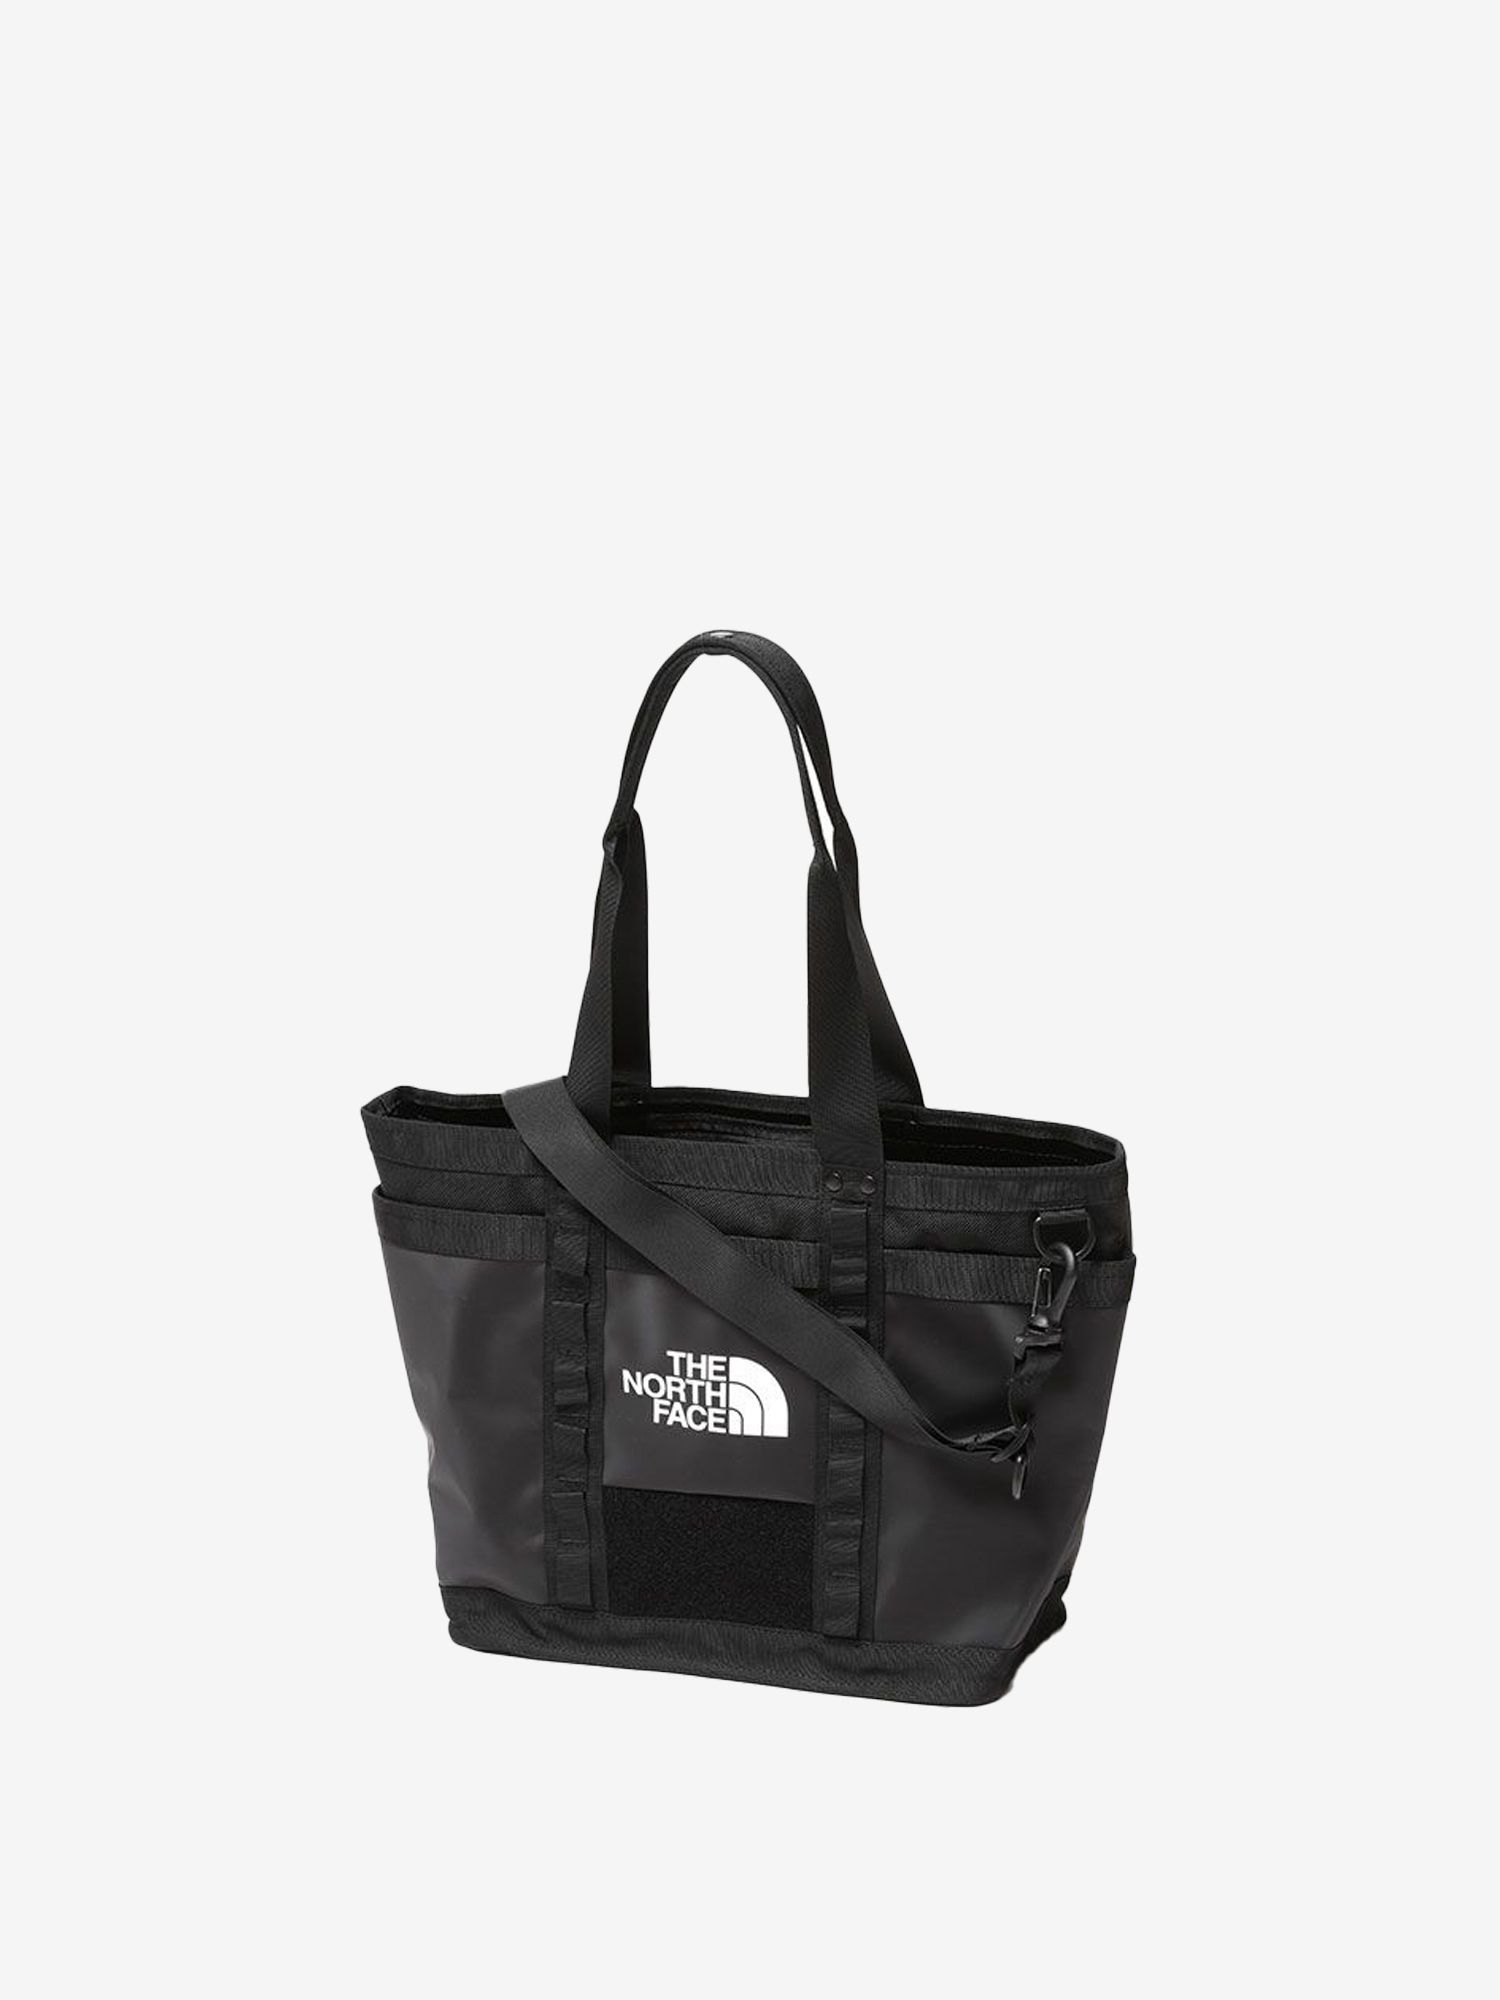 THE NORTH FACE　UTILITY TOTE